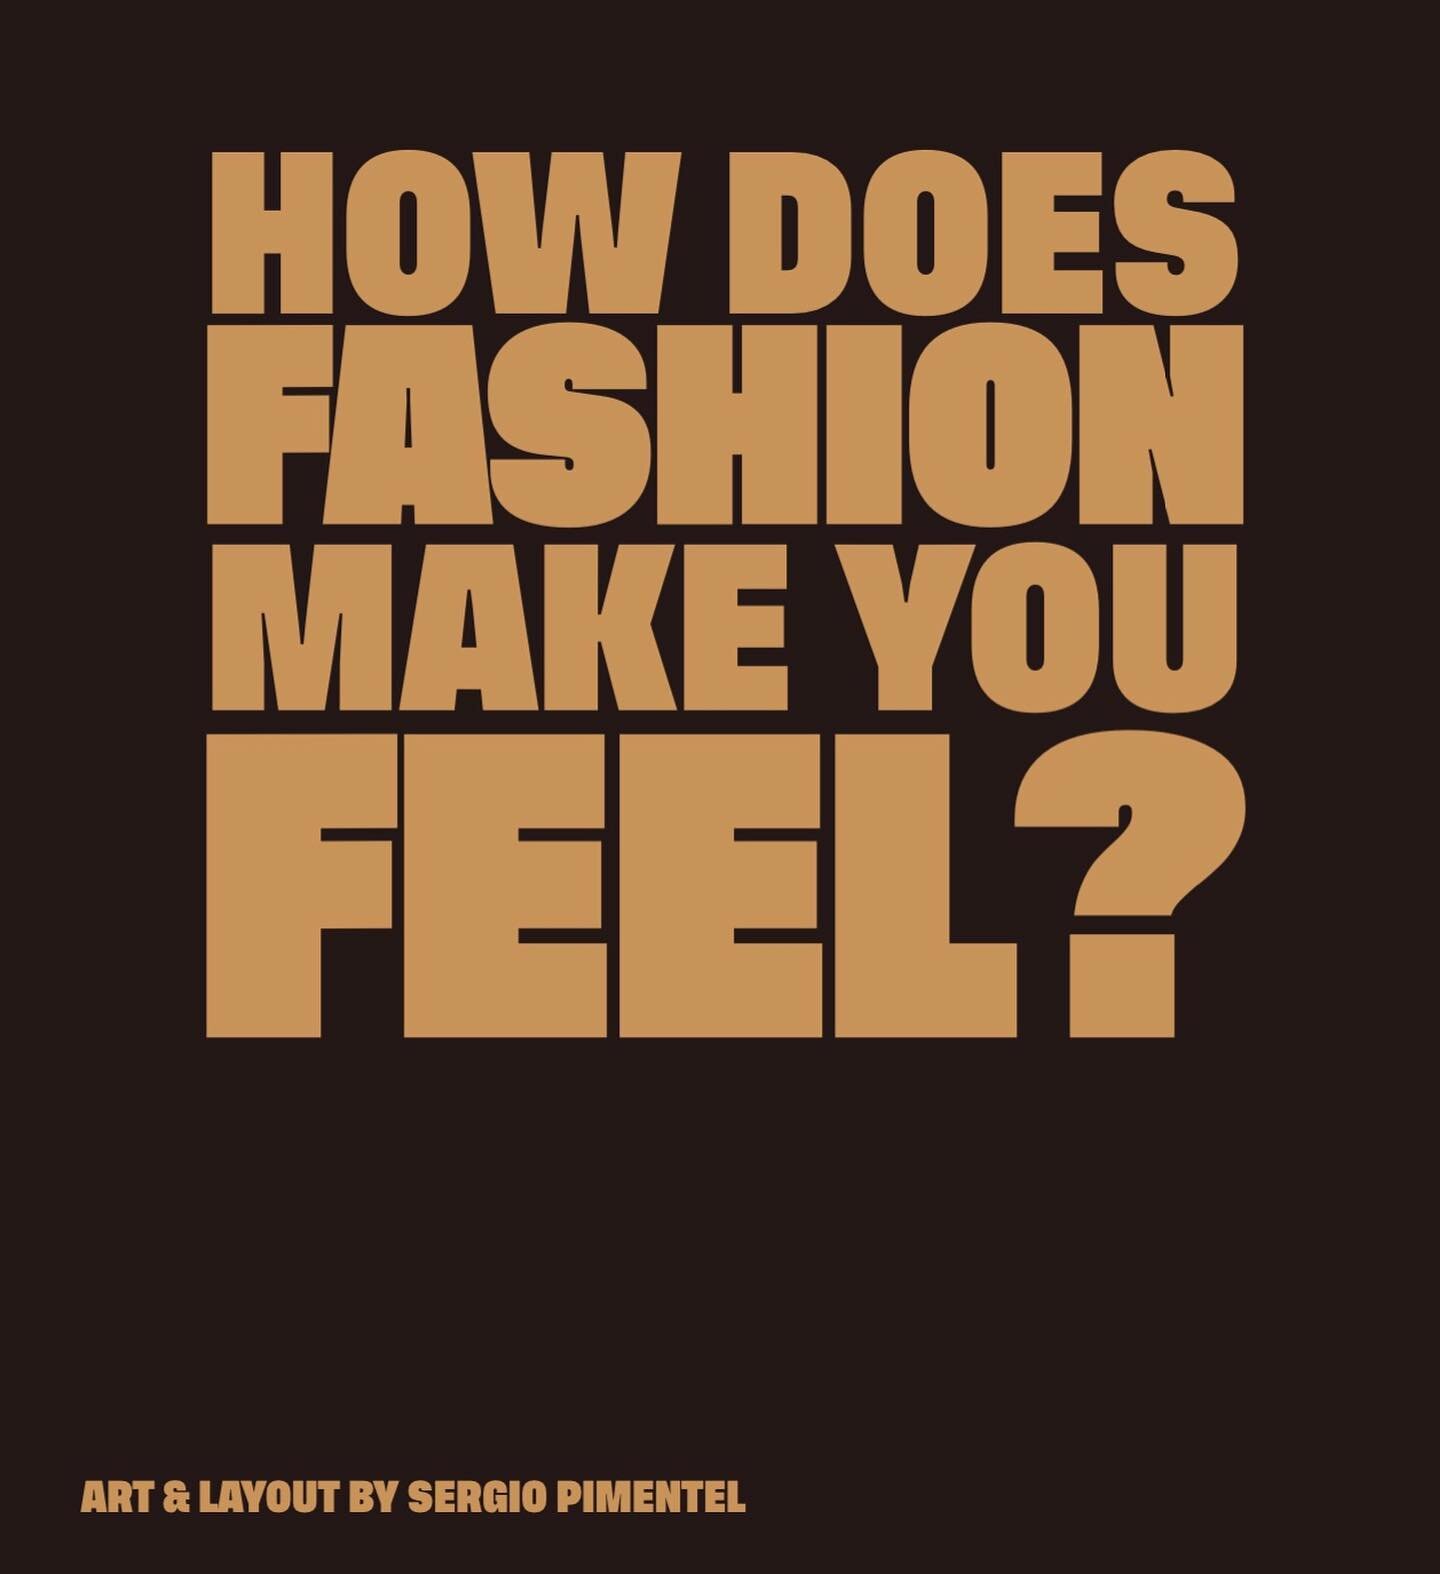 &ldquo;How Fashion Makes You Feel&rdquo; is an ode to the fashion world and the trend cycles. Fashion is rapidly evolving, ushering in fresh perspectives and ideas from creatives all across the globe, so is there a possibility that one day we could r